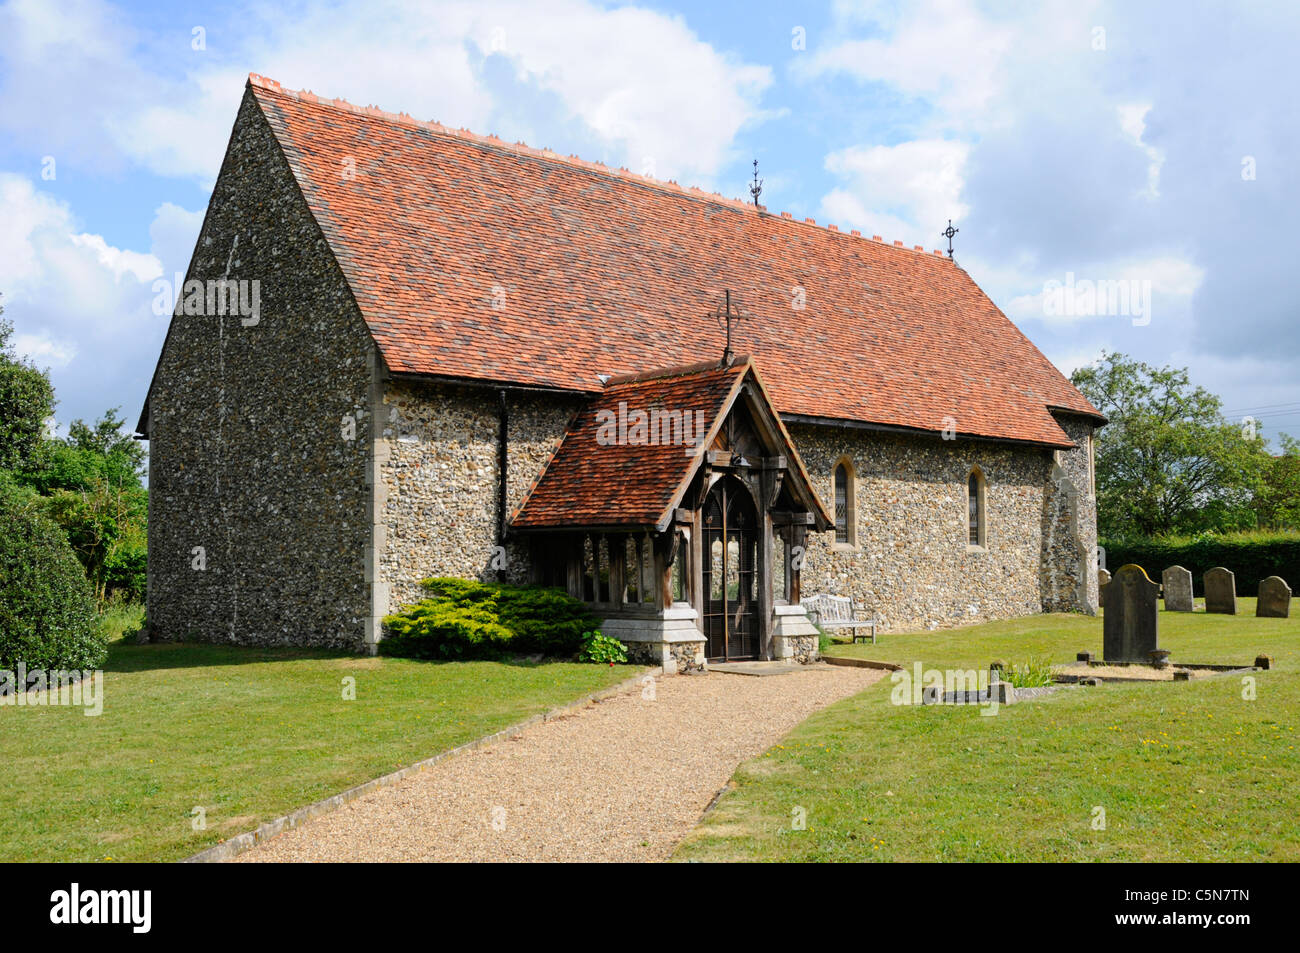 Church of St Mary at Little Laver a Church of England village parish church graveyard & porch grade 2 listed building in Essex countryside England UK Stock Photo